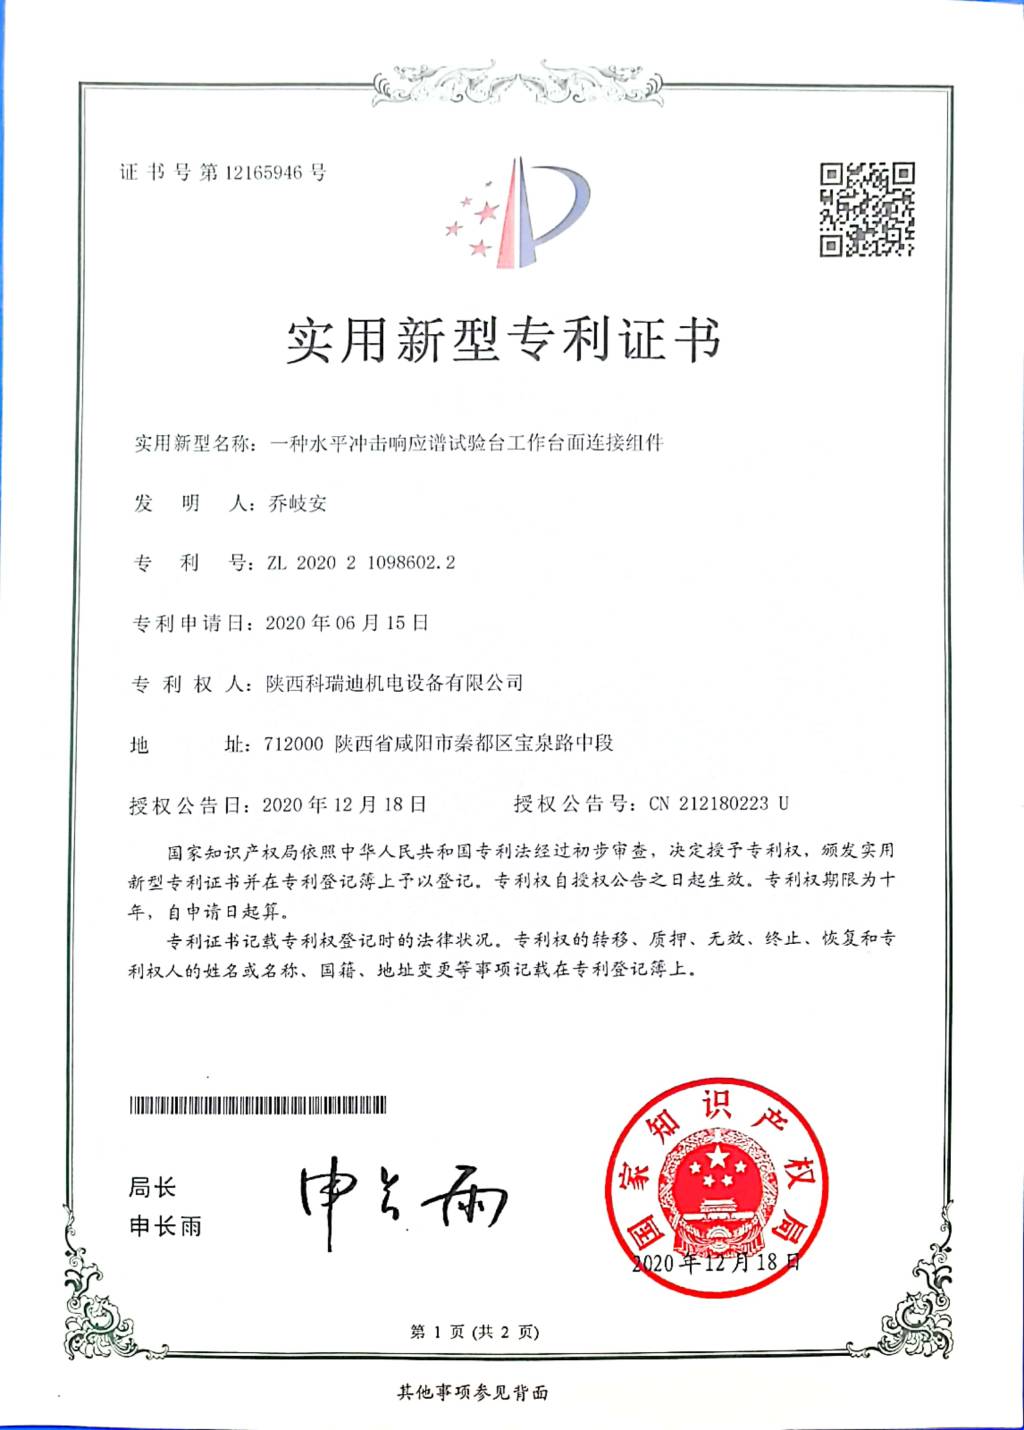 patent right certificate of shock test machine